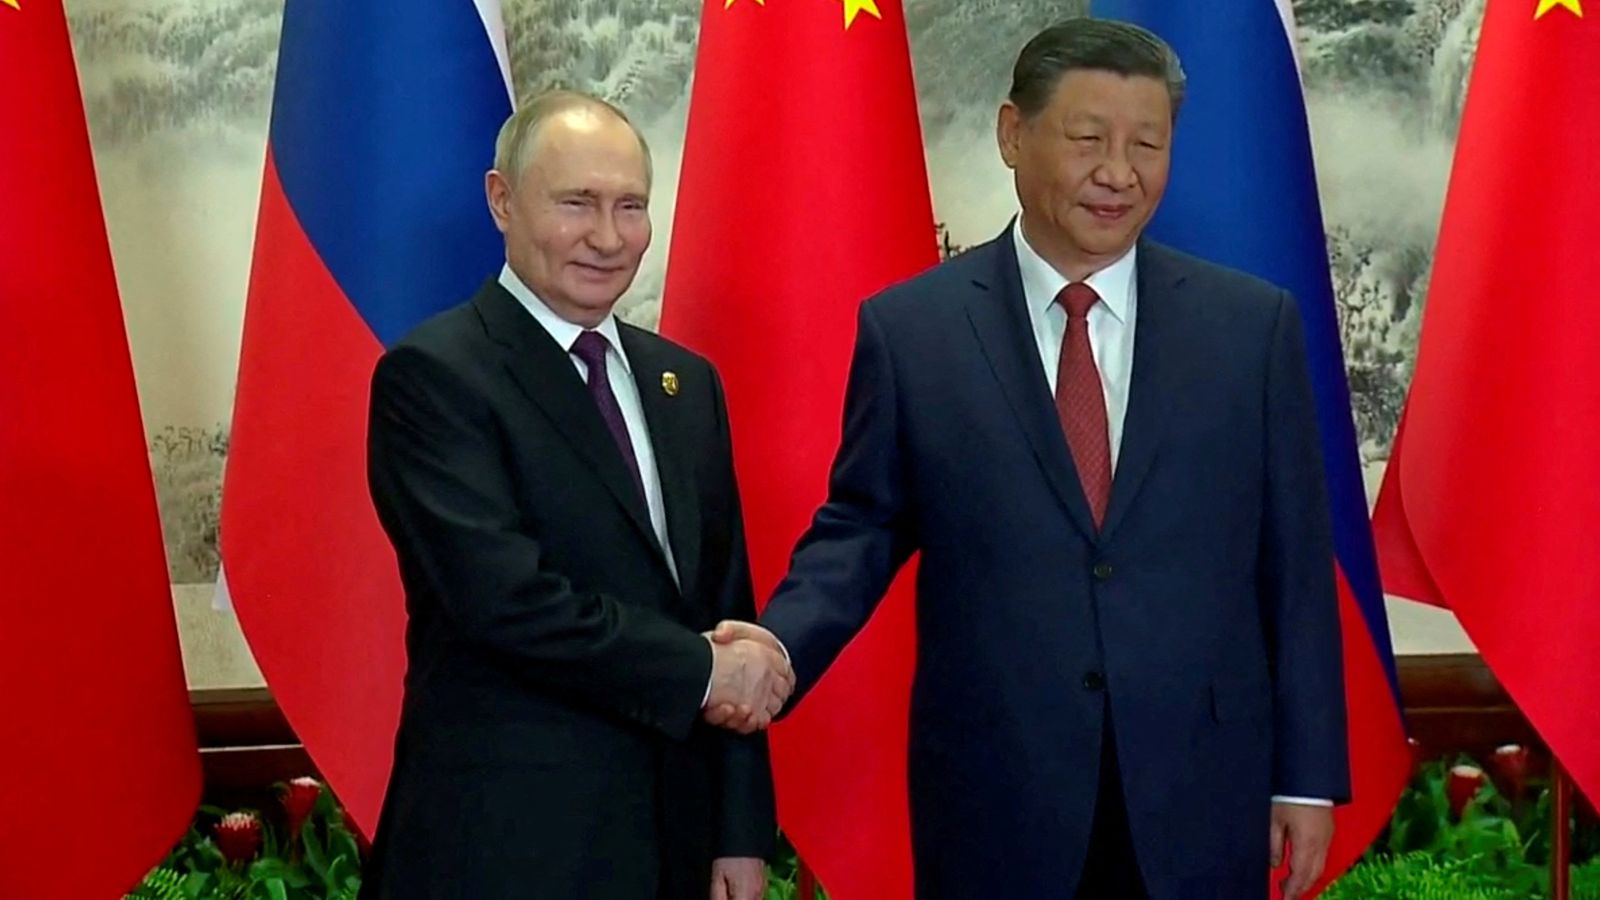 What will China want to talk about during Vladimir Putin's state visit?